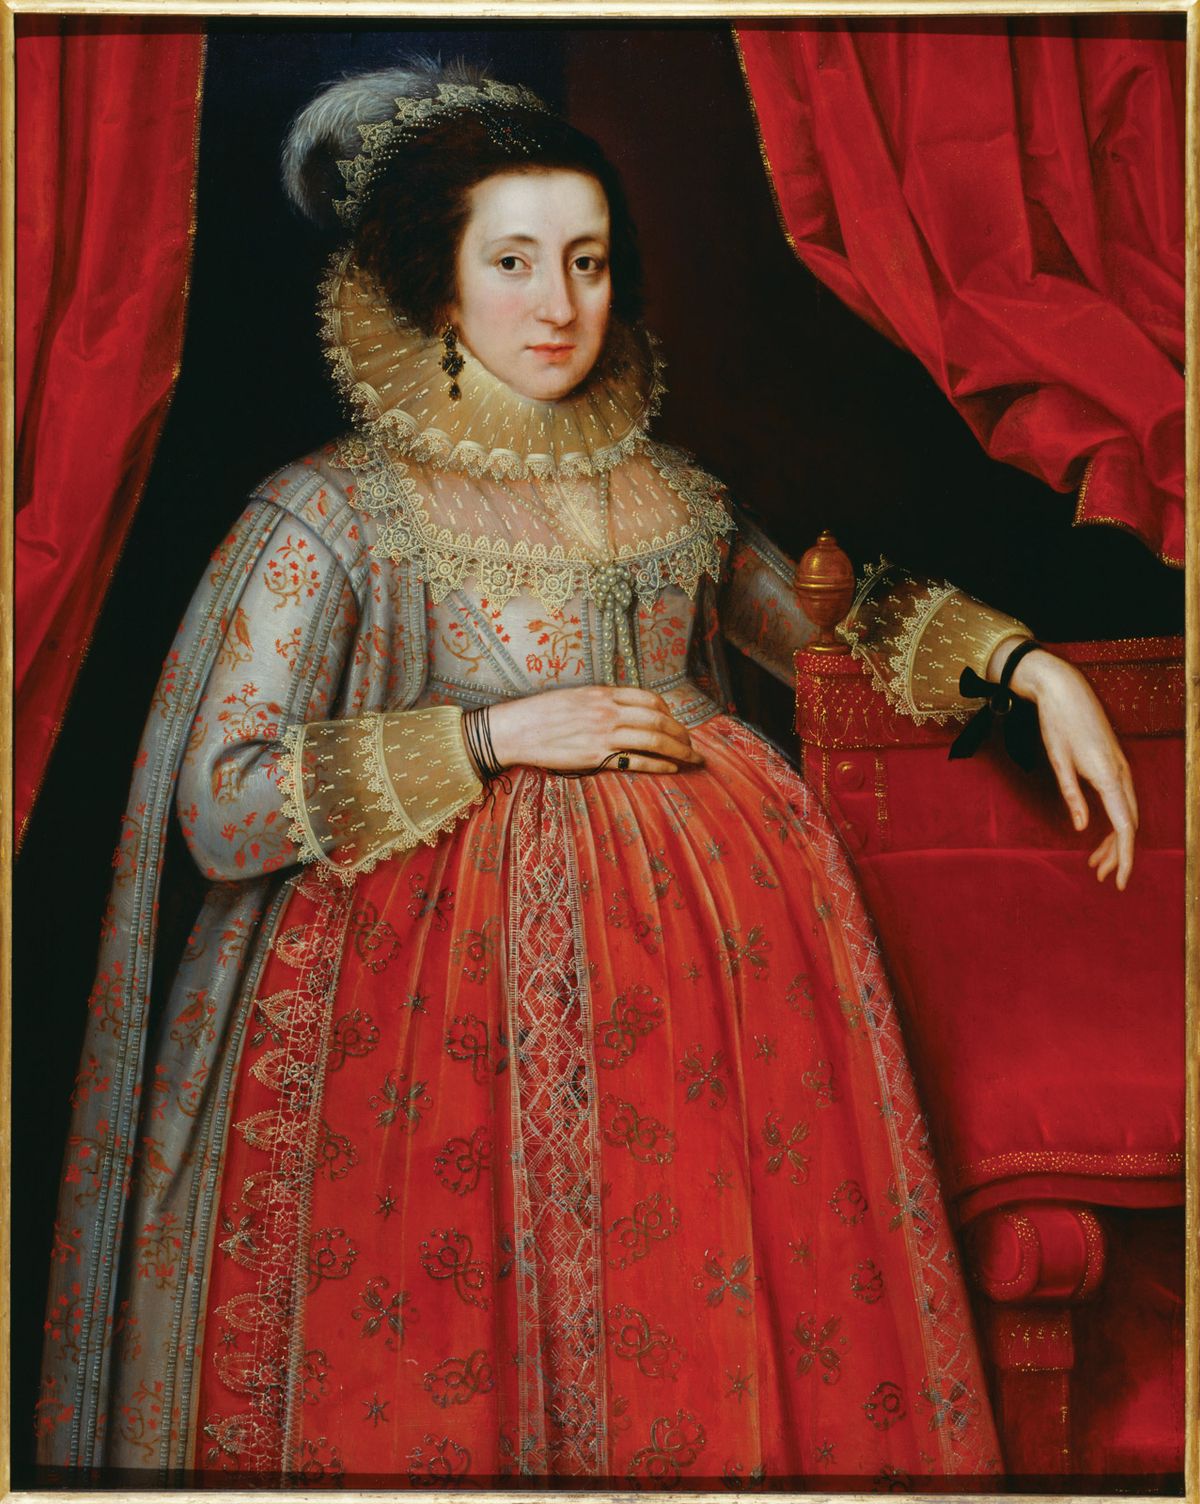 Marcus Gheeraerts II’s Portrait of a Women in Red (1620), which will be exhibited in the exhibition Portraying Pregnancy: from Holbein to Social Media at the Foundling Museum © Tate